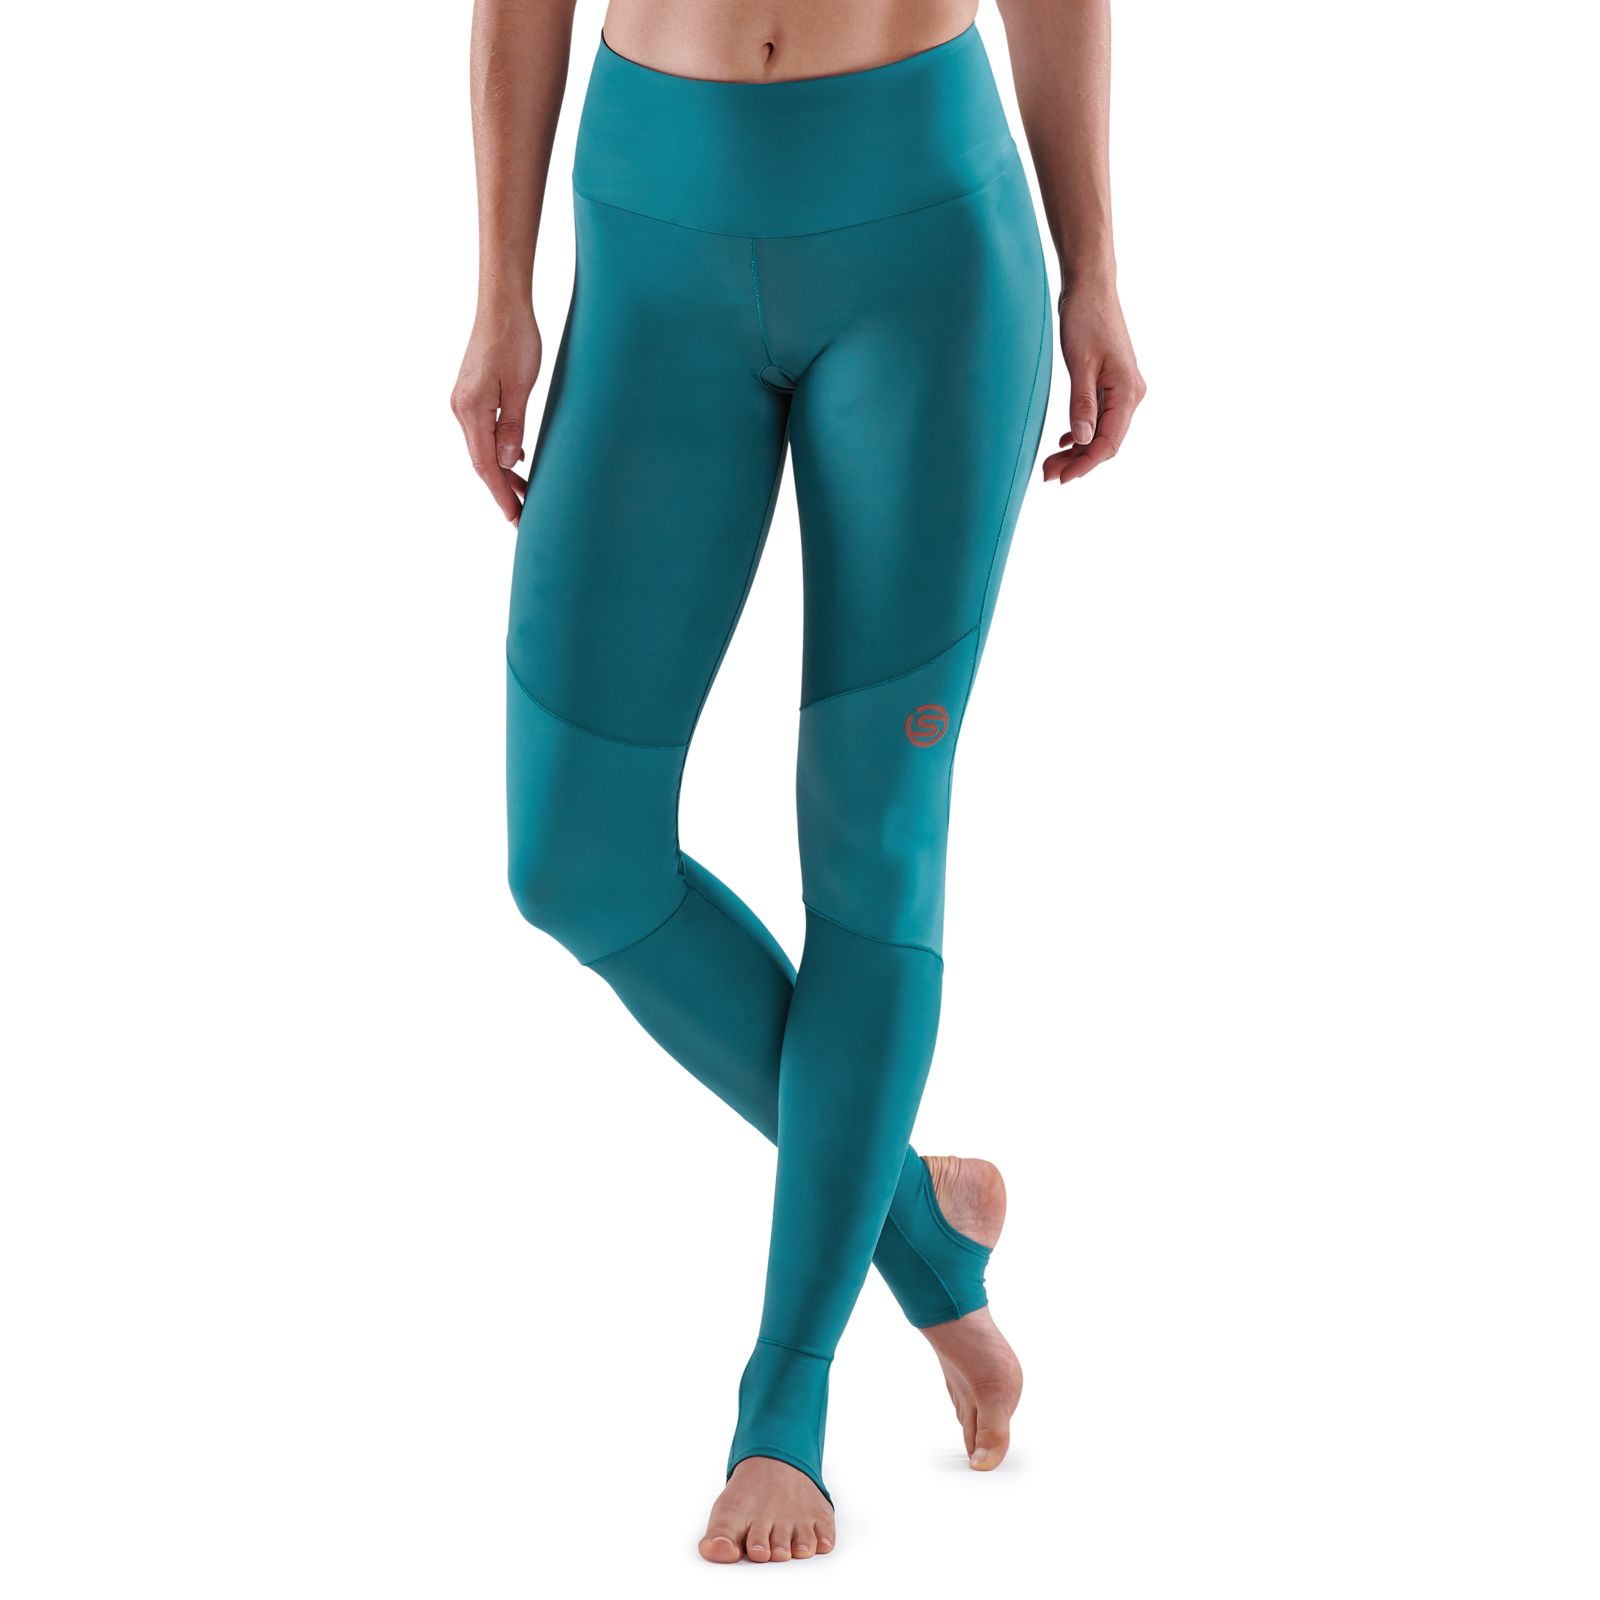 Travel and Recovery Tights